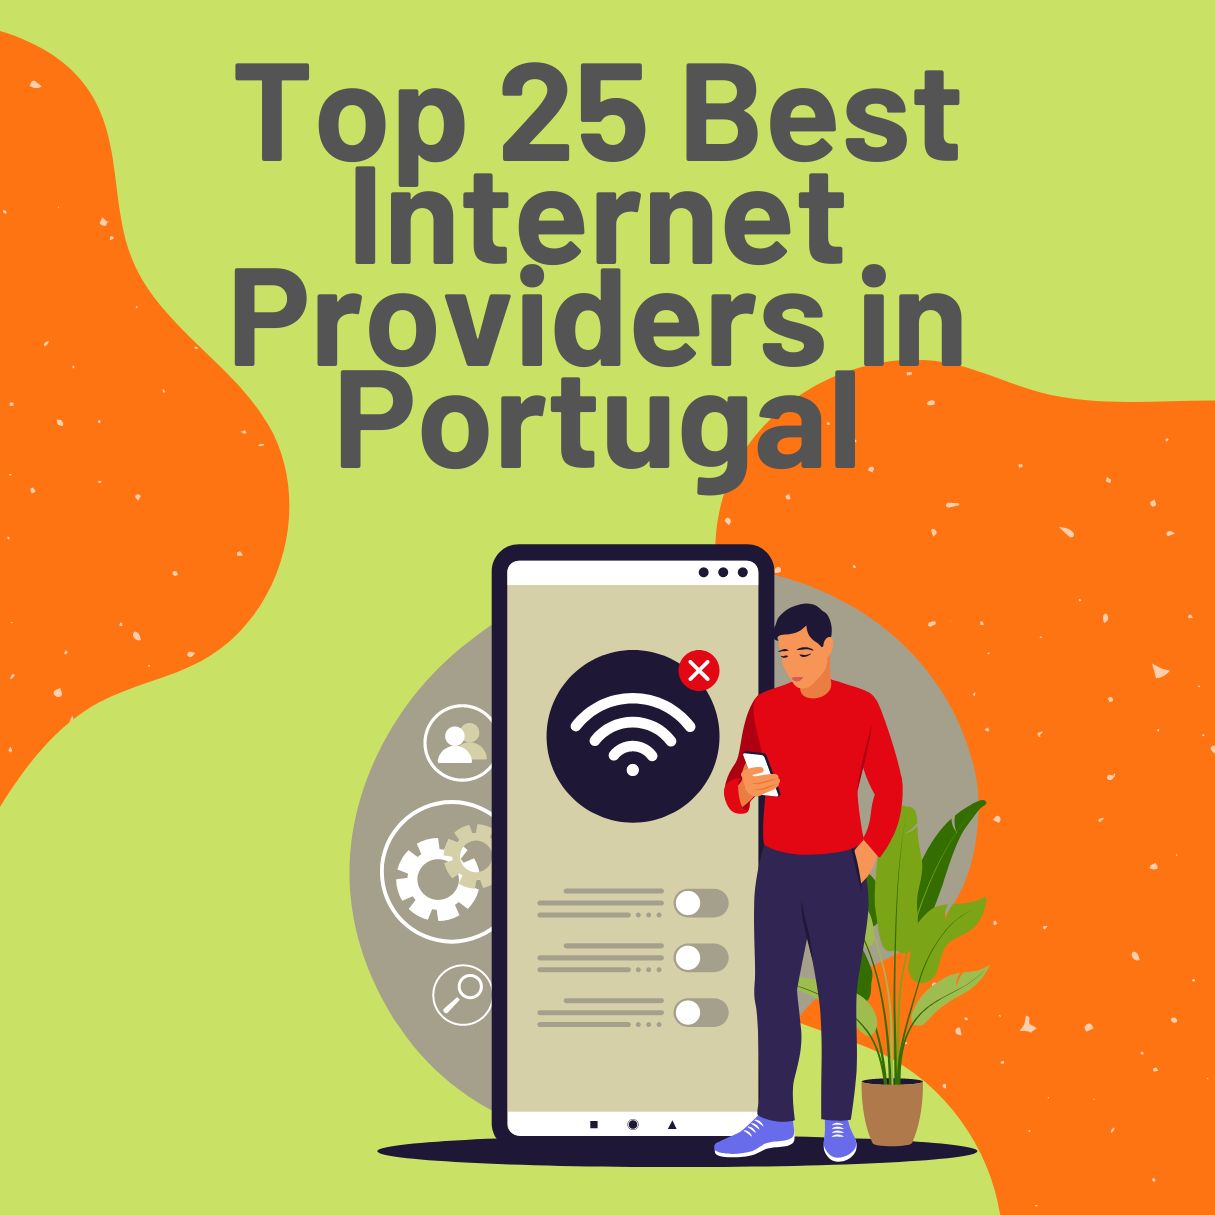 Top 25 Best Internet Providers in Portugal